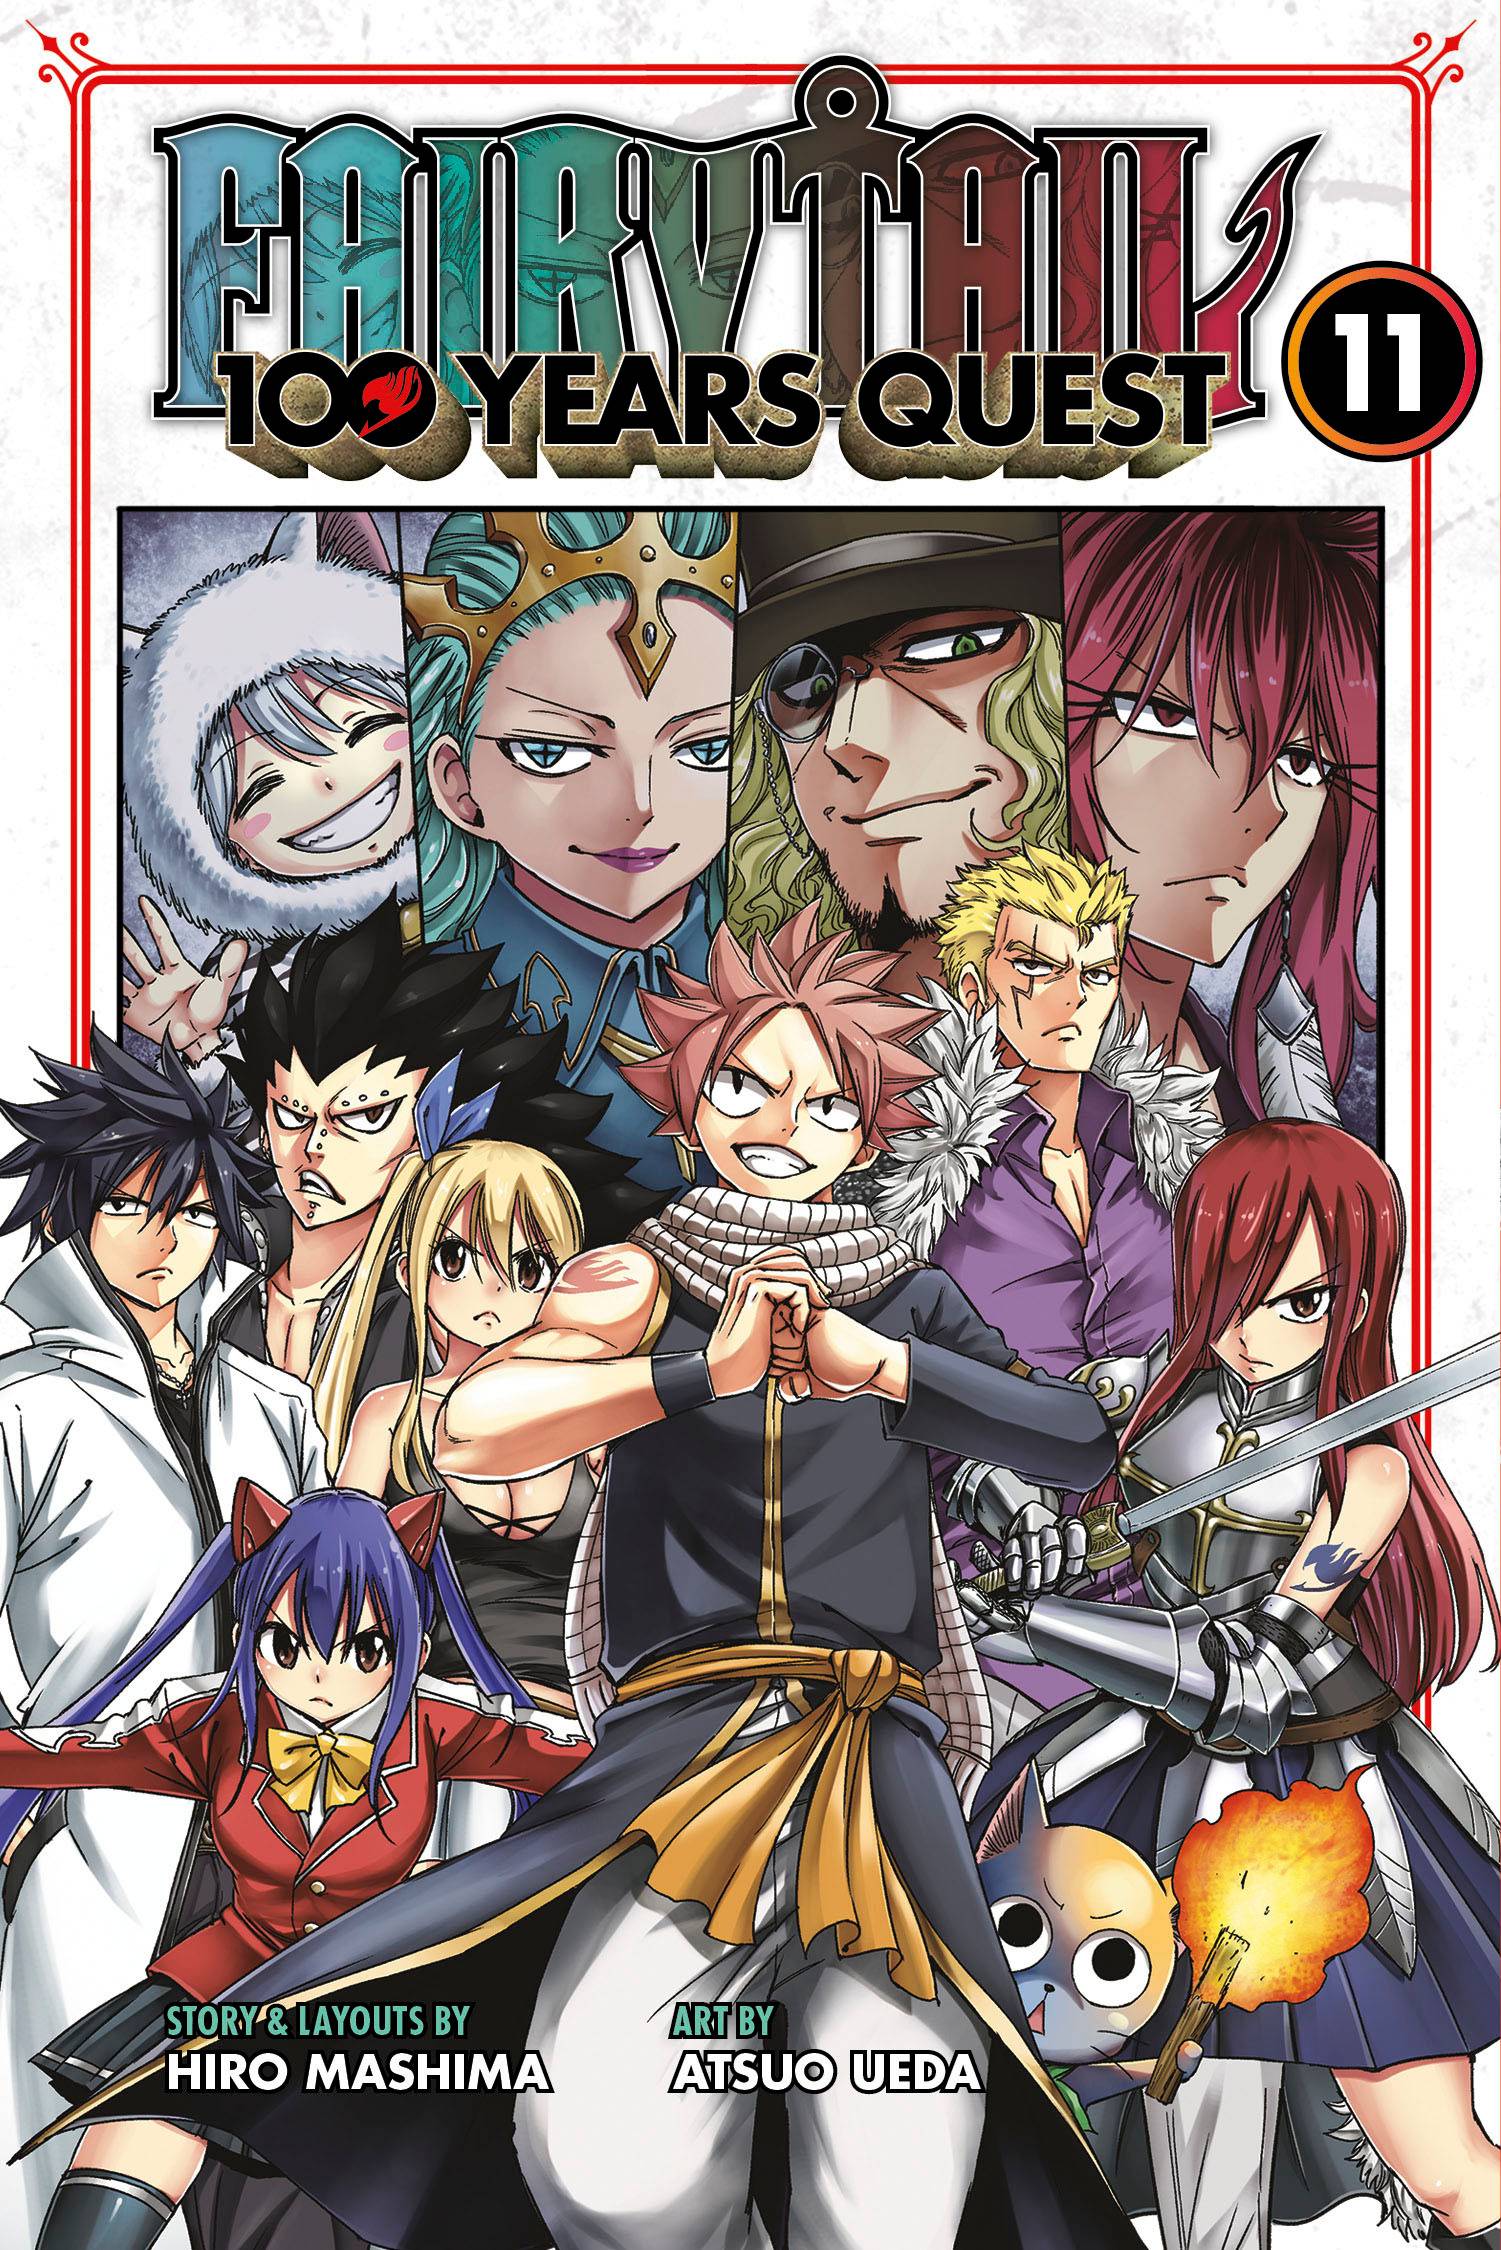 FAIRY TAIL 100 YEARS QUEST GN VOL 11